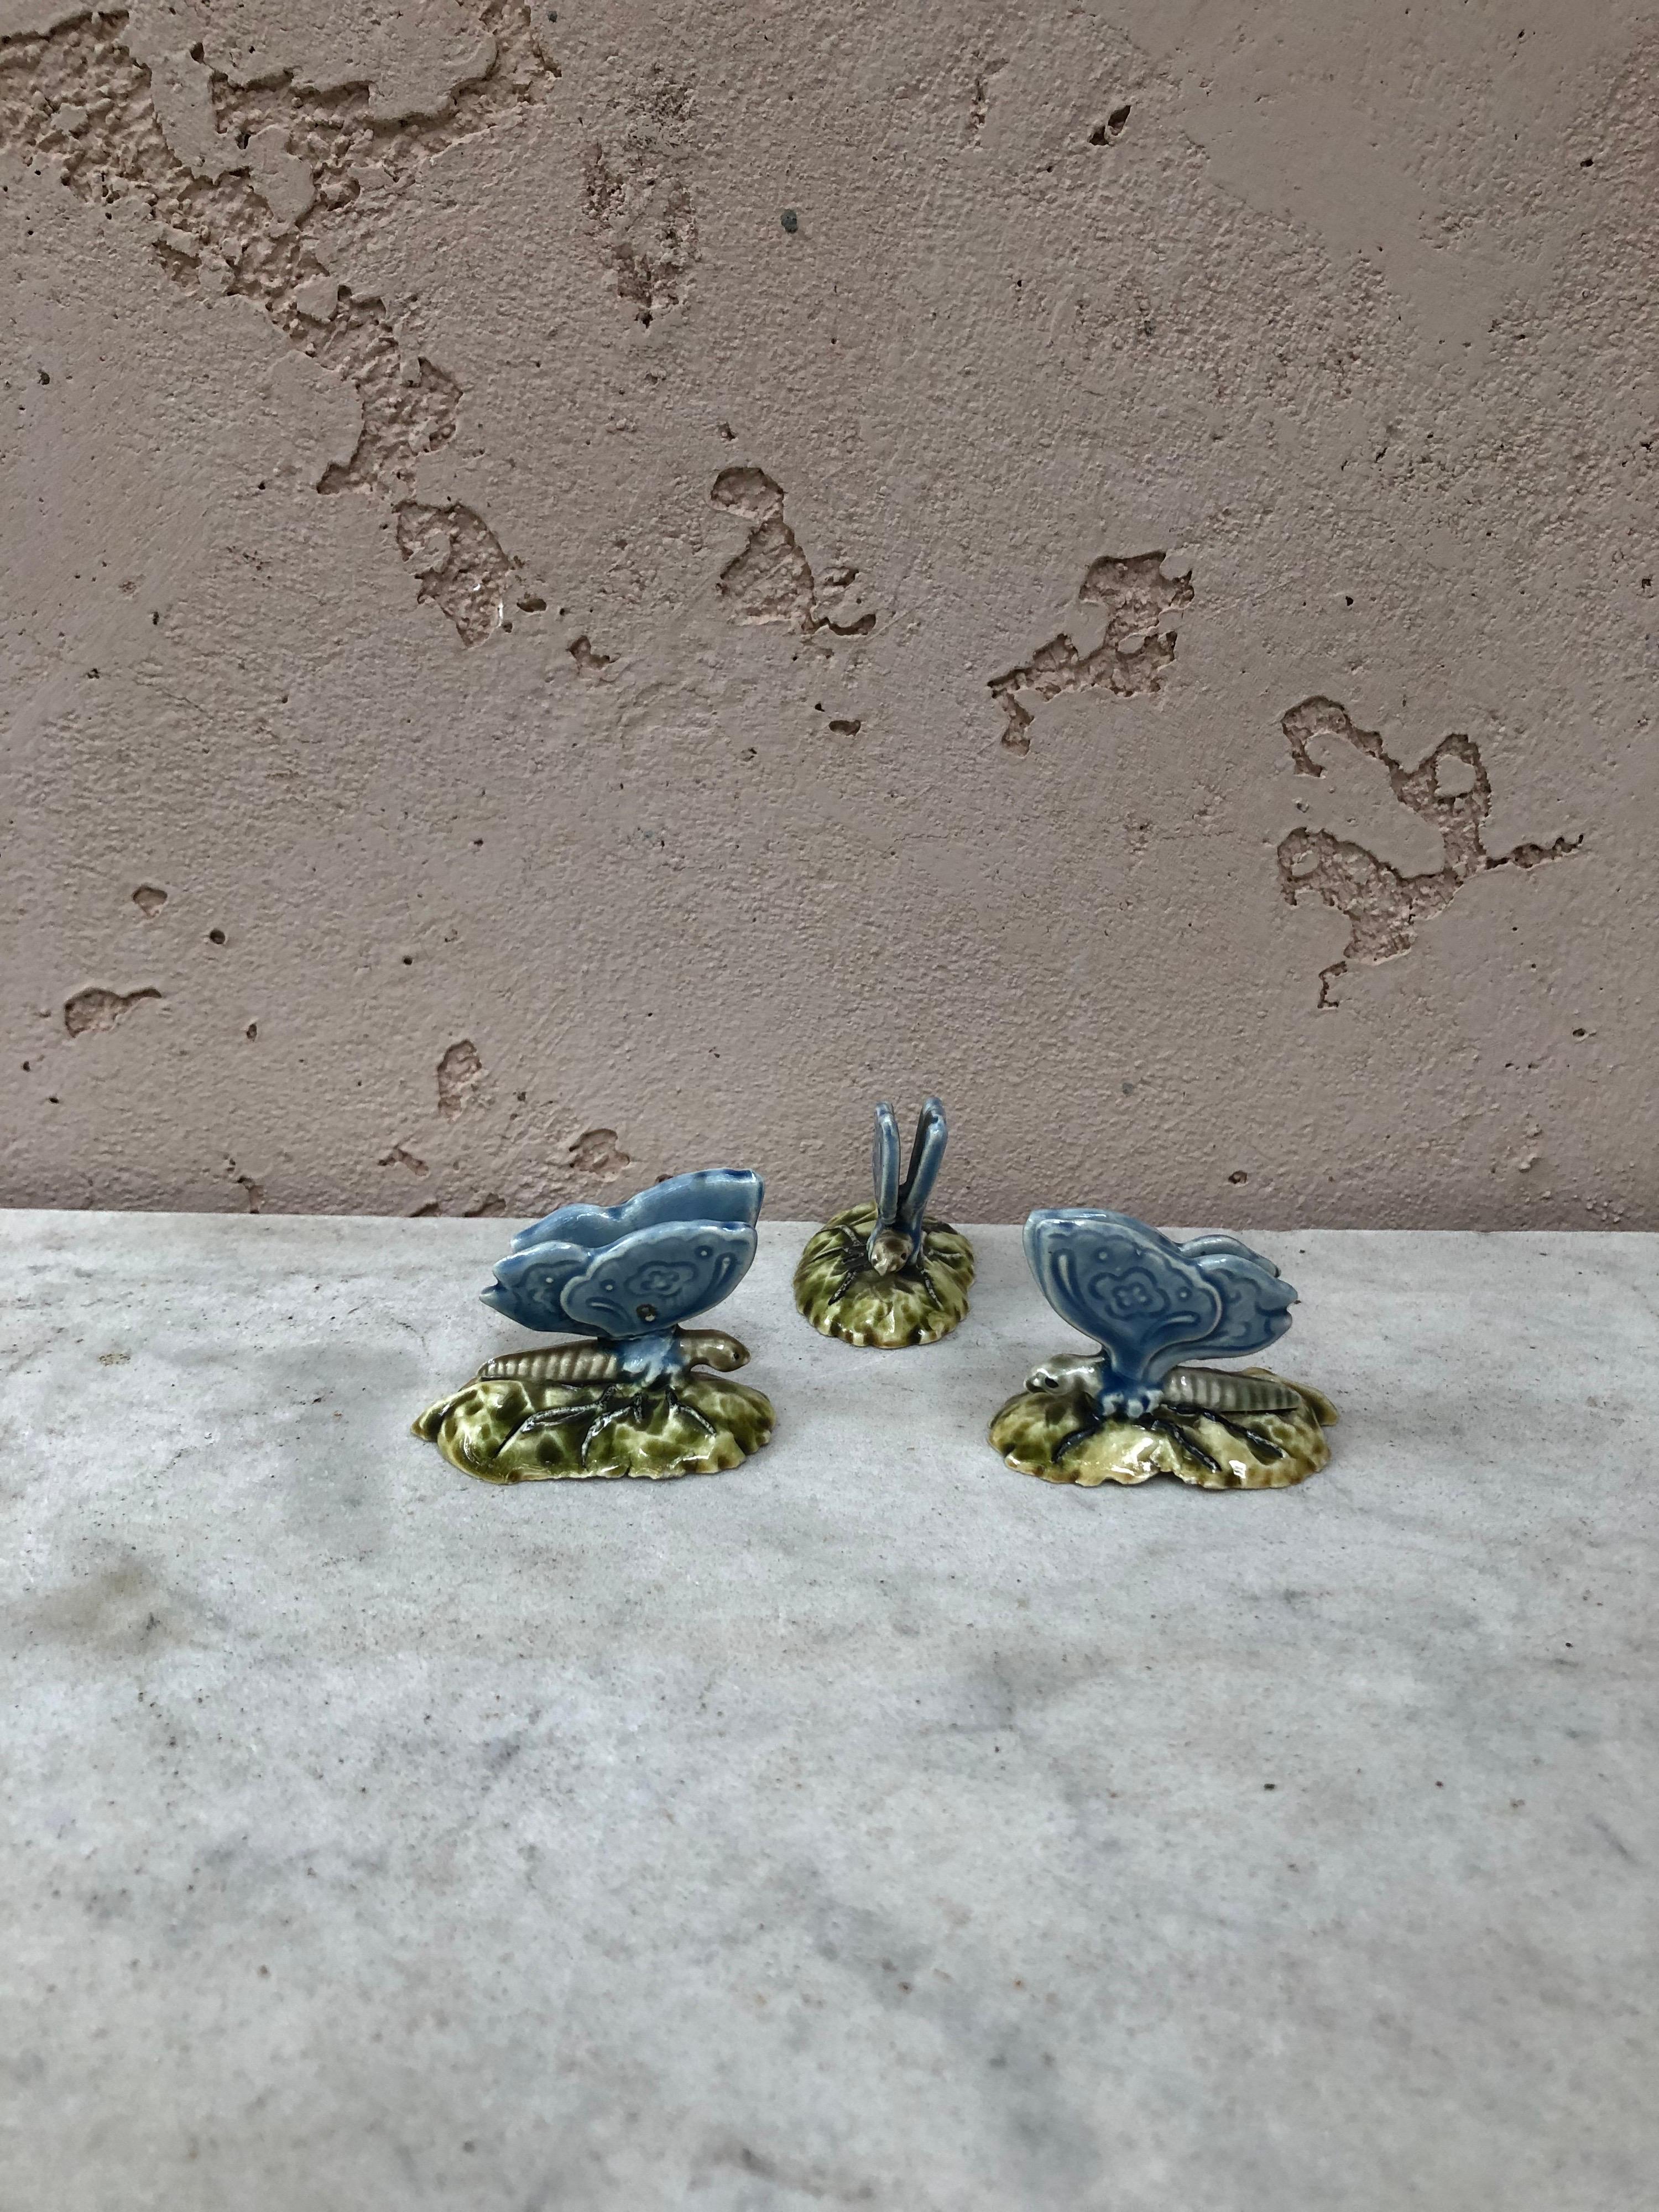 Set of 3 Majolica Butterflies Place Card Holder Choisy Le roi Circa 1880 In Good Condition For Sale In Austin, TX